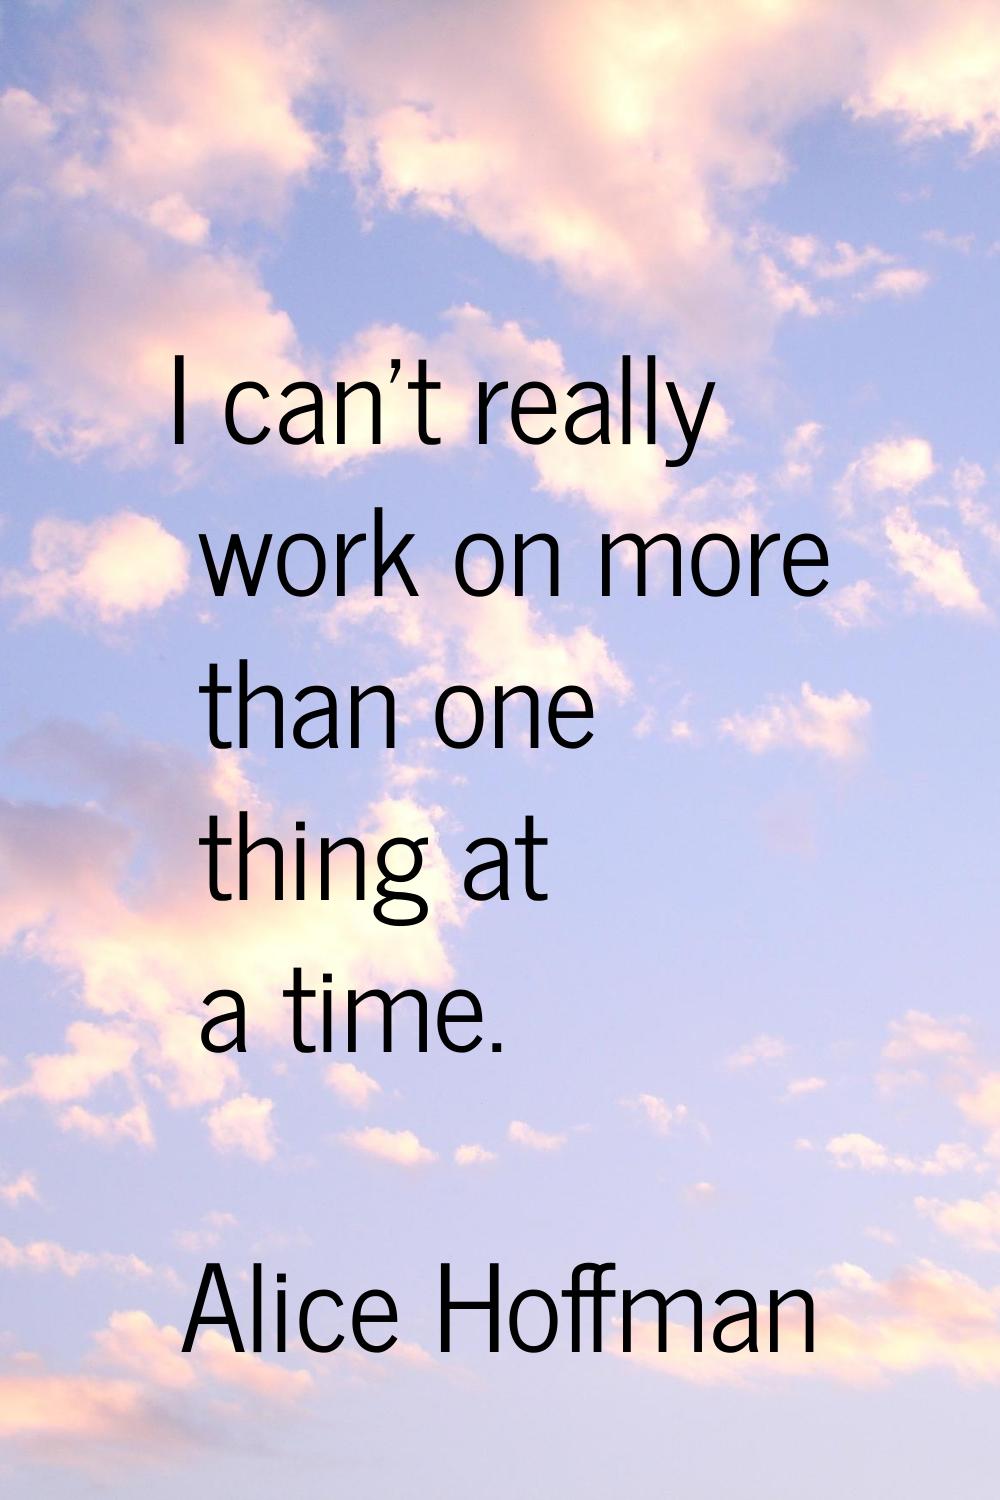 I can't really work on more than one thing at a time.